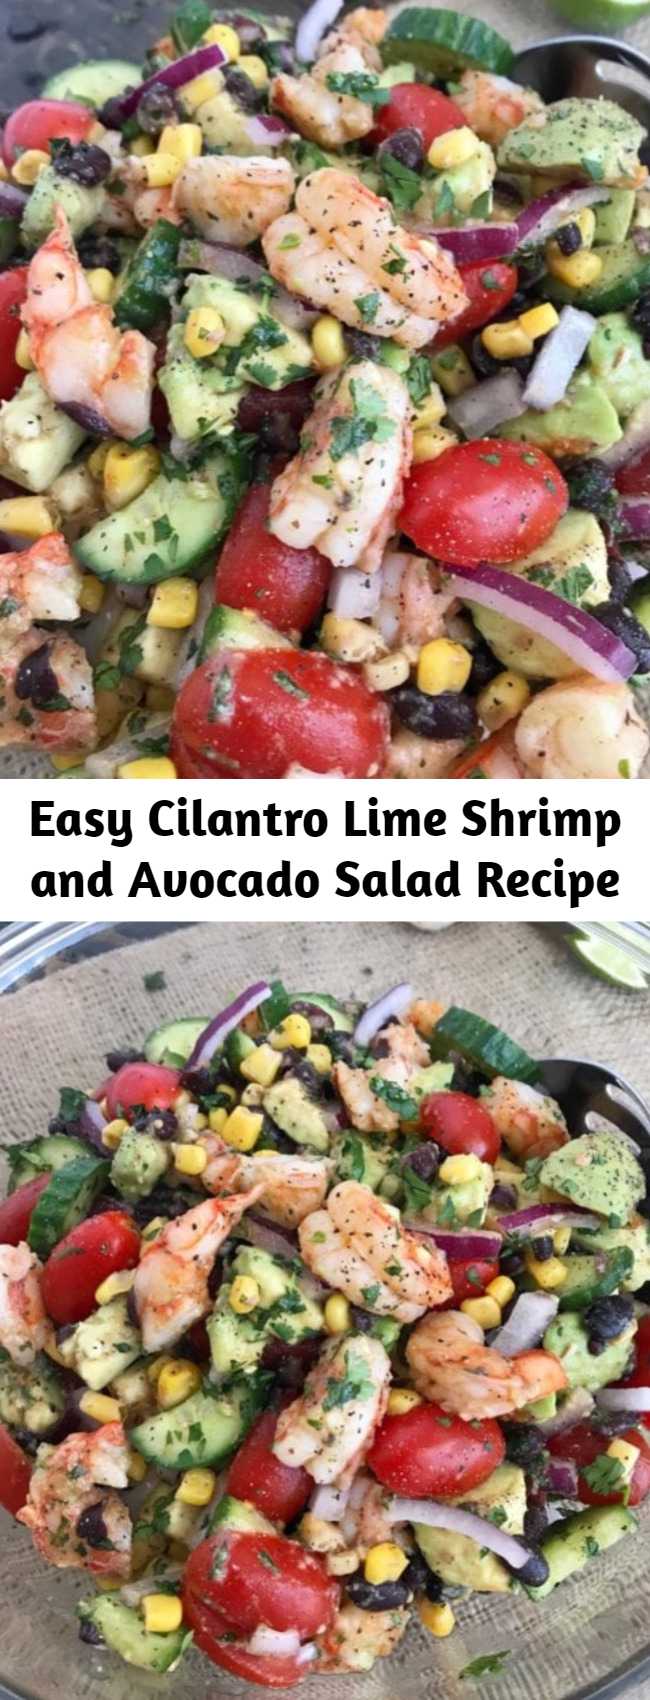 Easy Cilantro Lime Shrimp and Avocado Salad Recipe - a salad packed full of vegetables that will become a go-to meal or dish in your kitchen from the moment you try it! This salad is very easy to make, light and refreshing in flavor, and can be made in minutes. The perfect low-calorie meal or side dish if you're looking for something simple and quick. #salad #shrimp #avocado #healthy